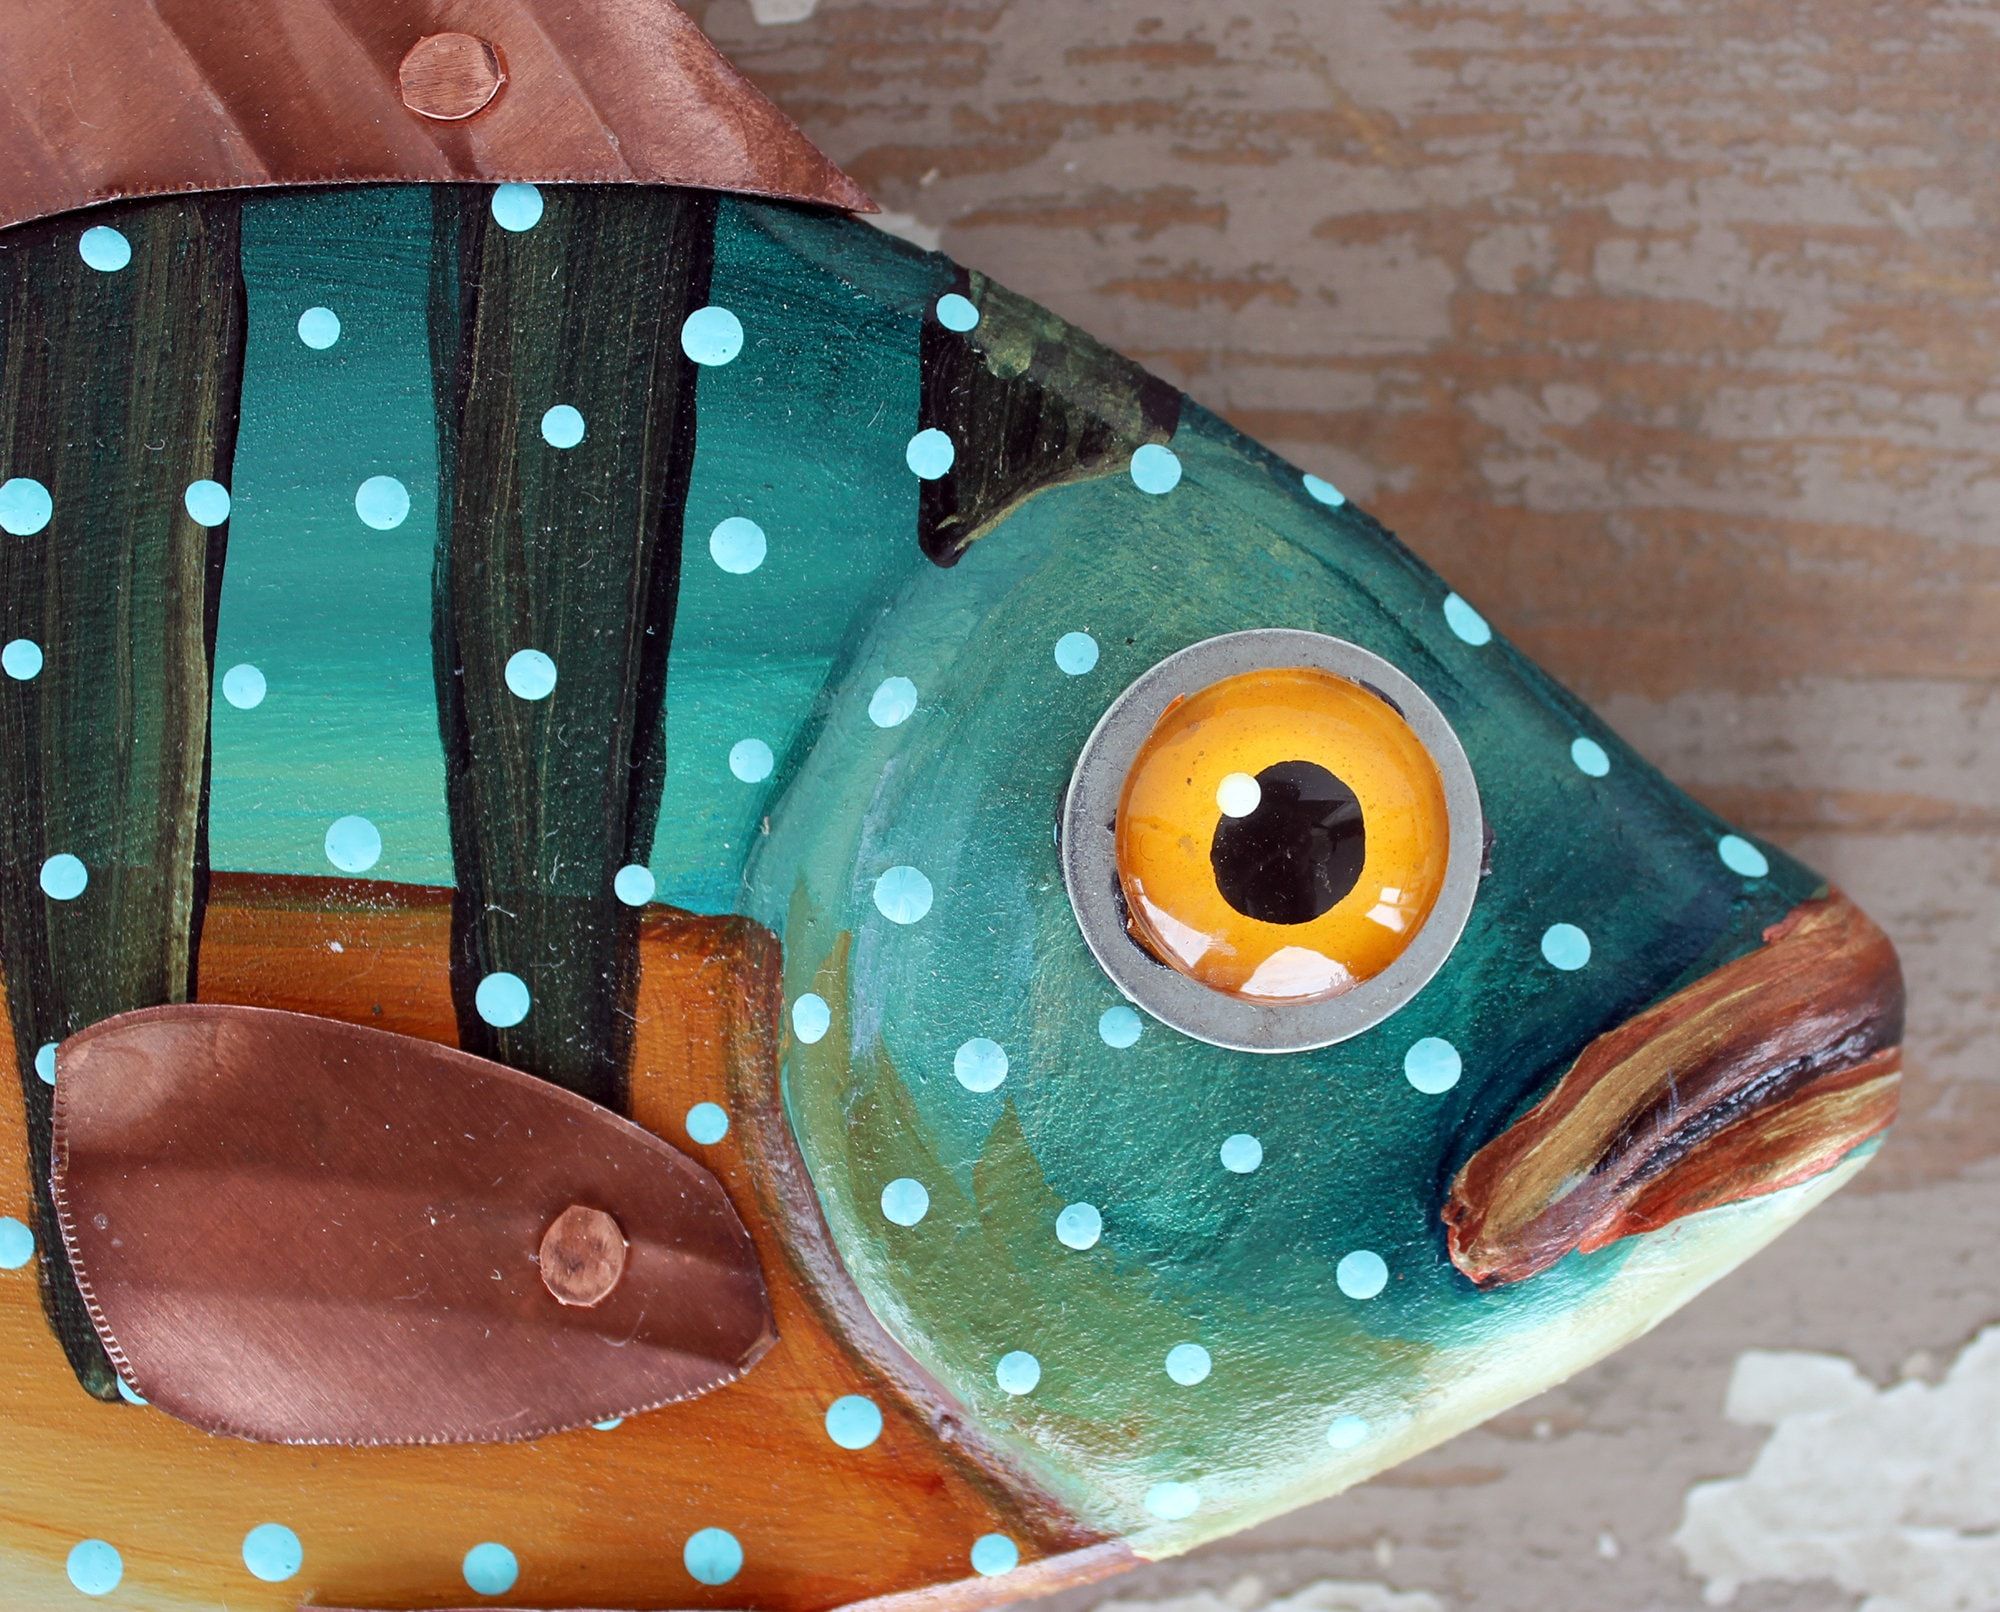 Cece 10, Sunfish Minnow, Happy Hand Painted Wood Fish Wall Art,copper Within Most Recent Fish Wall Art (View 7 of 20)